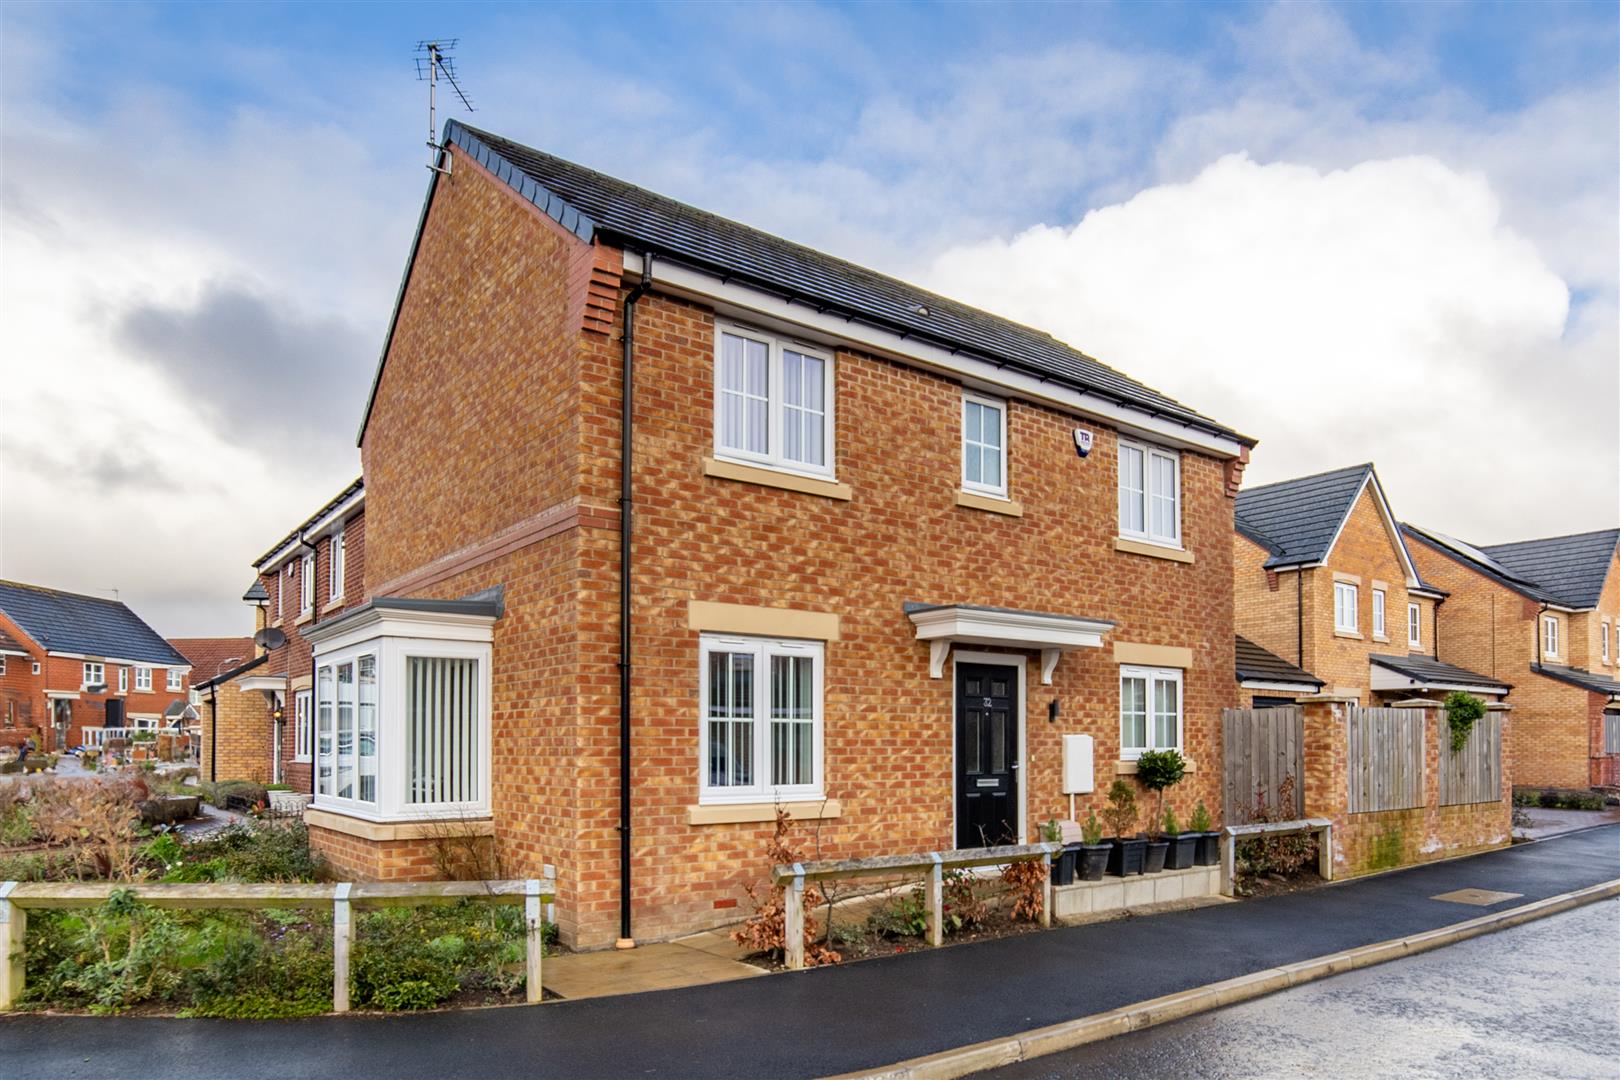 3 bed detached house for sale in Brandling Way, Morpeth  - Property Image 1